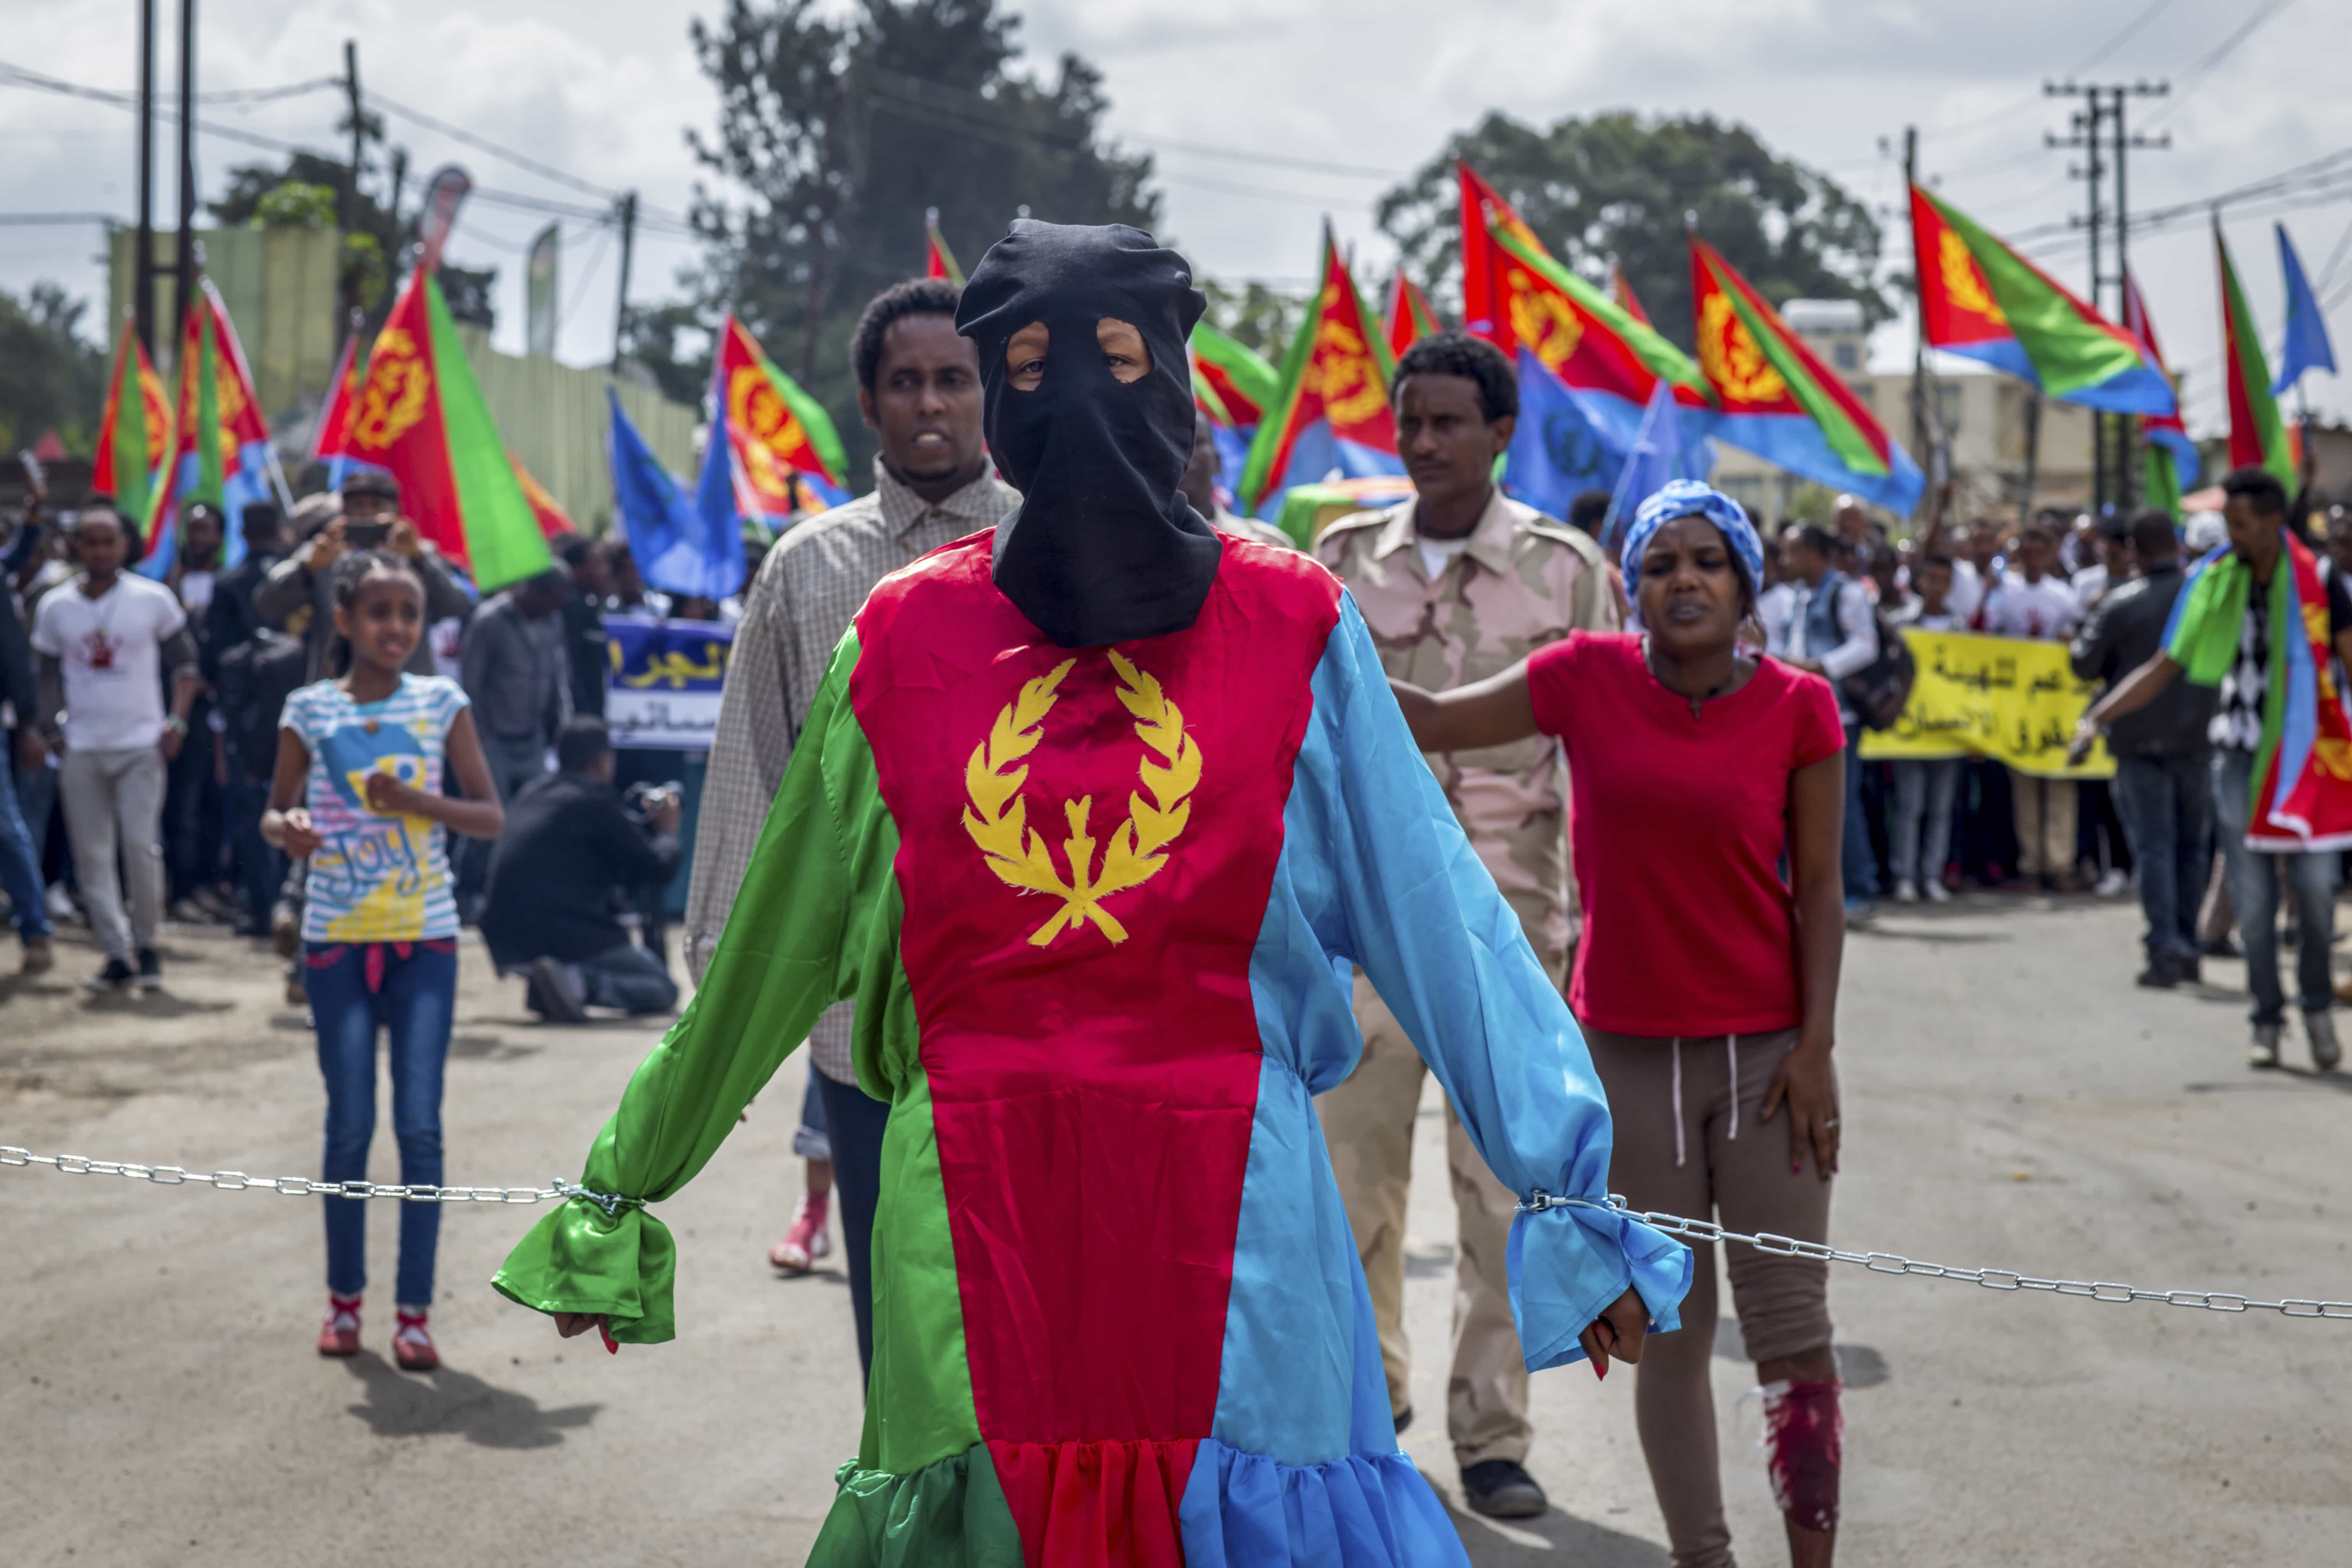 A woman dressed in the colours of the Eritrean flag stands symbolically chained, at a demonstration by Eritrean refugees and dissidents outside the headquarters of the African Union in Addis Ababa, Ethiopia, 23 June 2016, AP Photo/Mulugeta Ayene